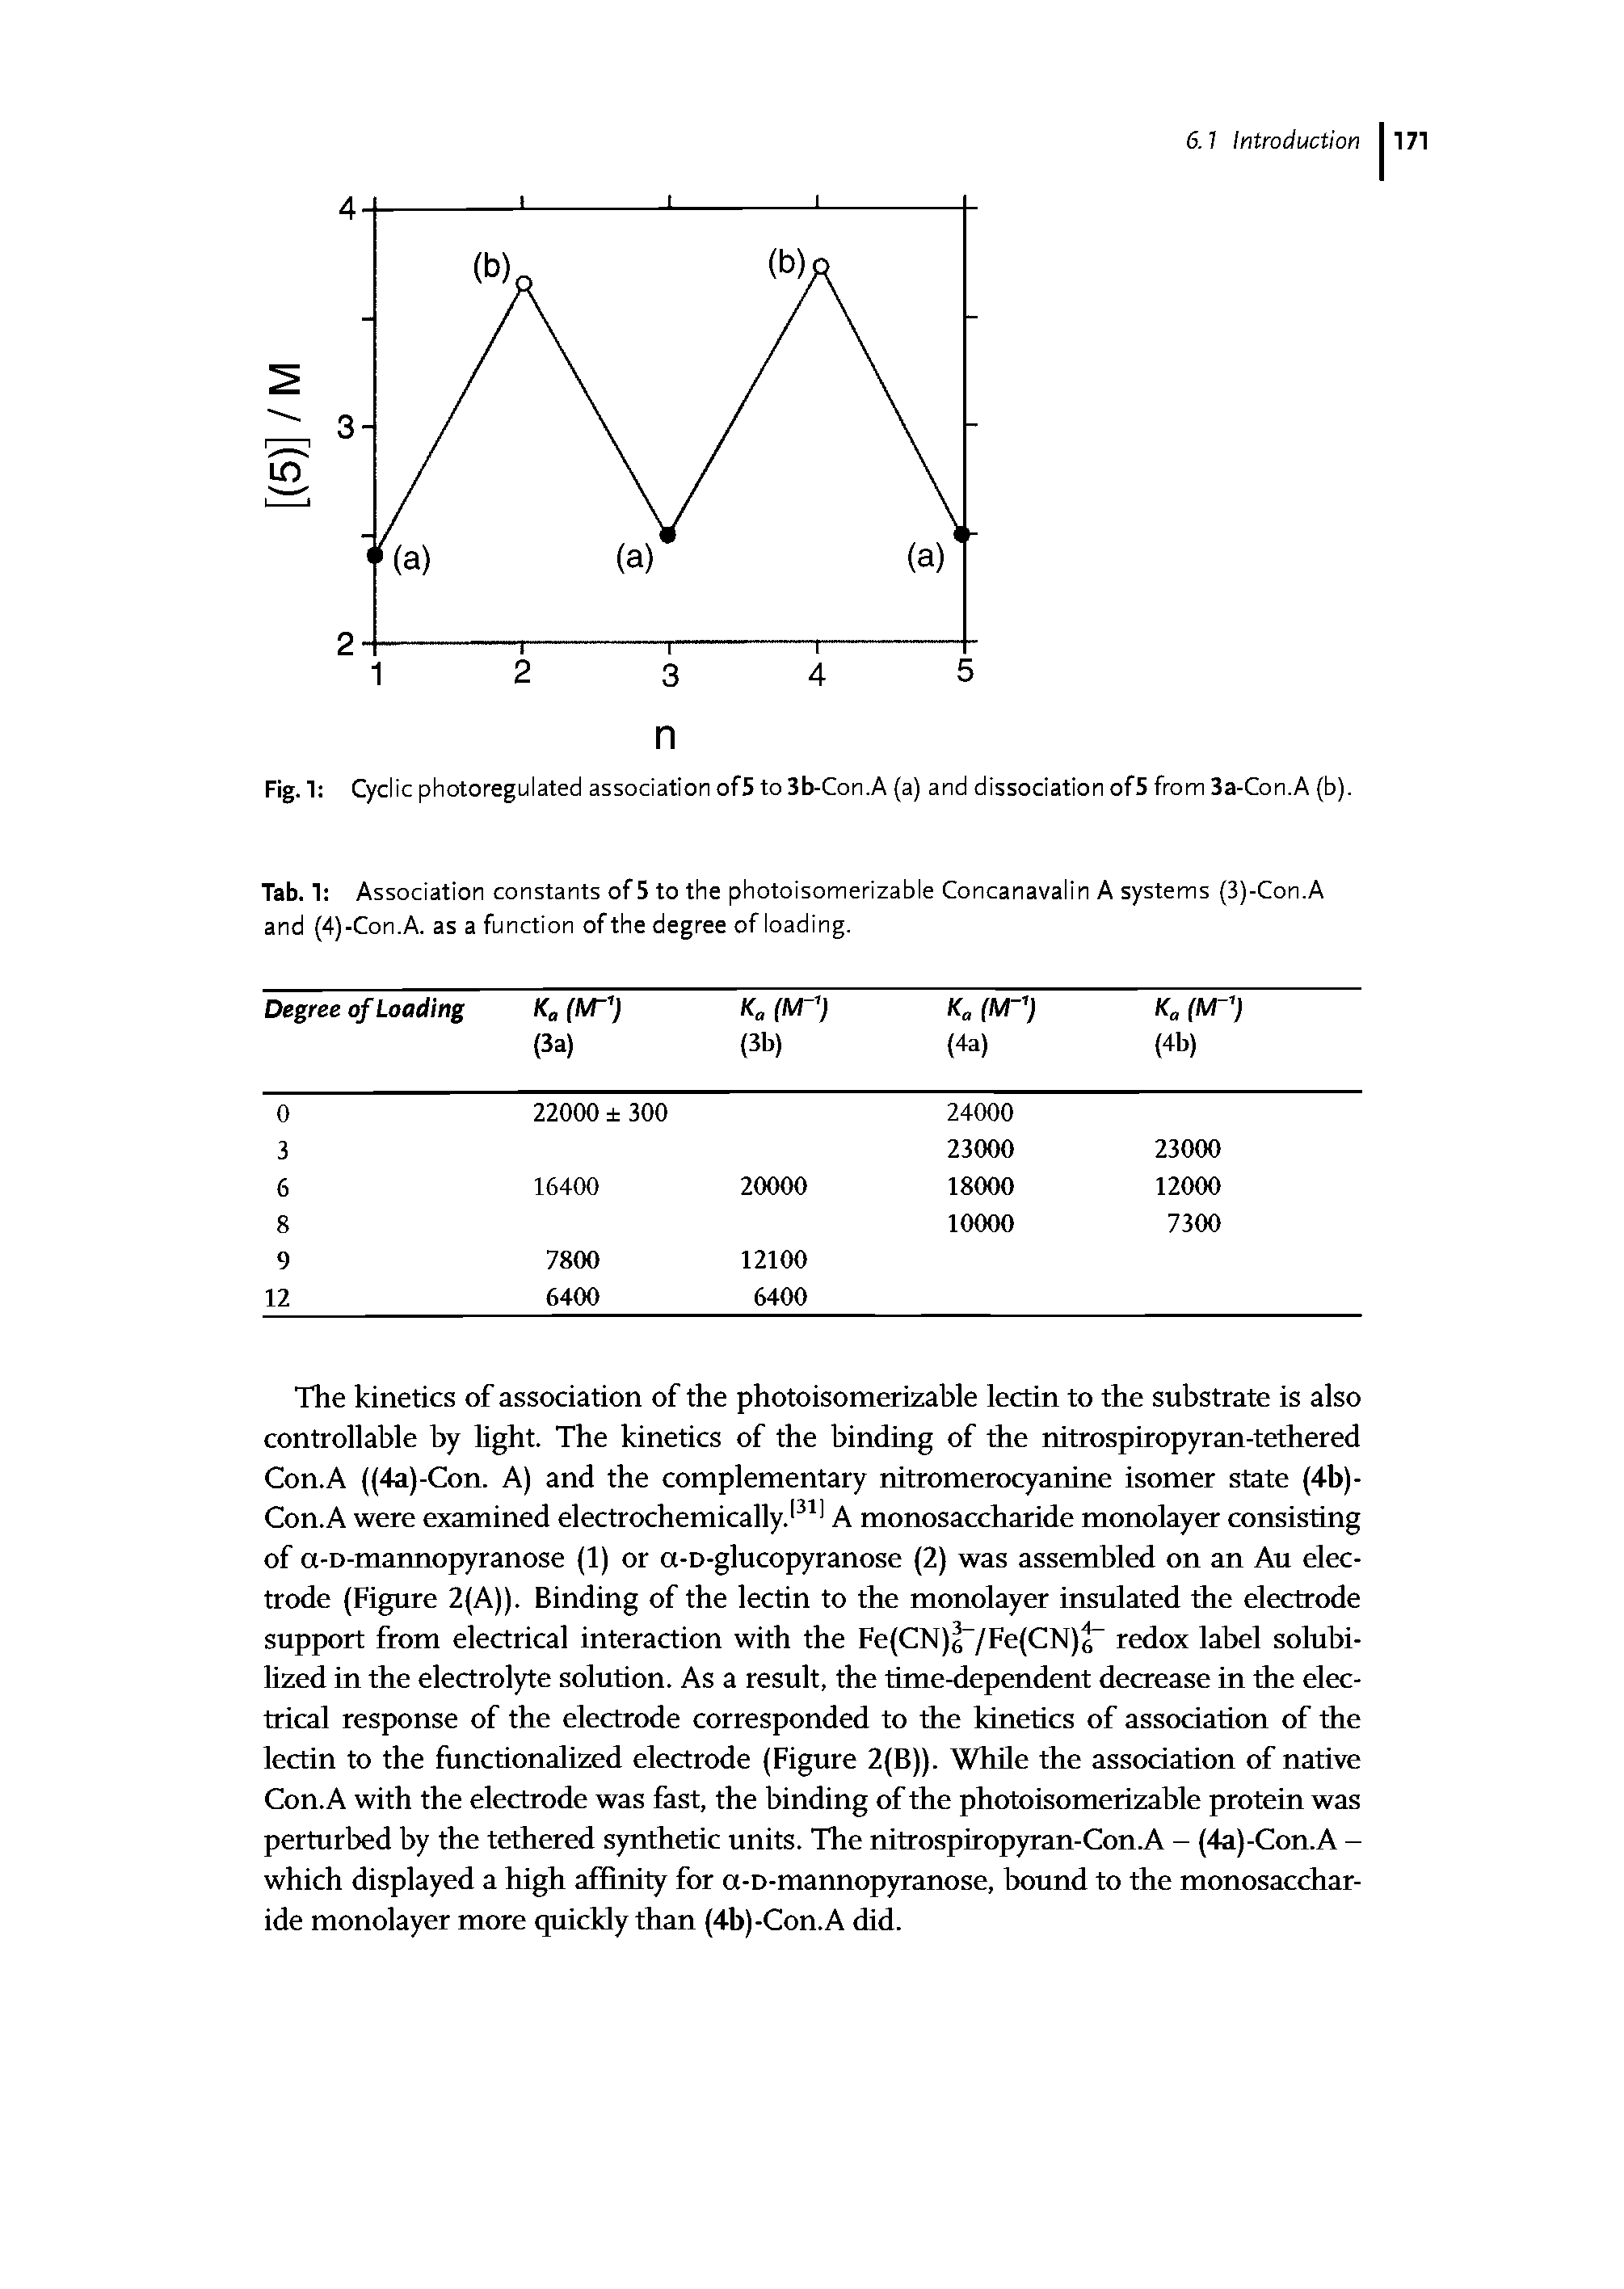 Tab. 1 Association constants of 5 to the photoisomerizable Concanavalin A systems (3)-Con.A and (4)-Con.A. as a function of the degree of loading.